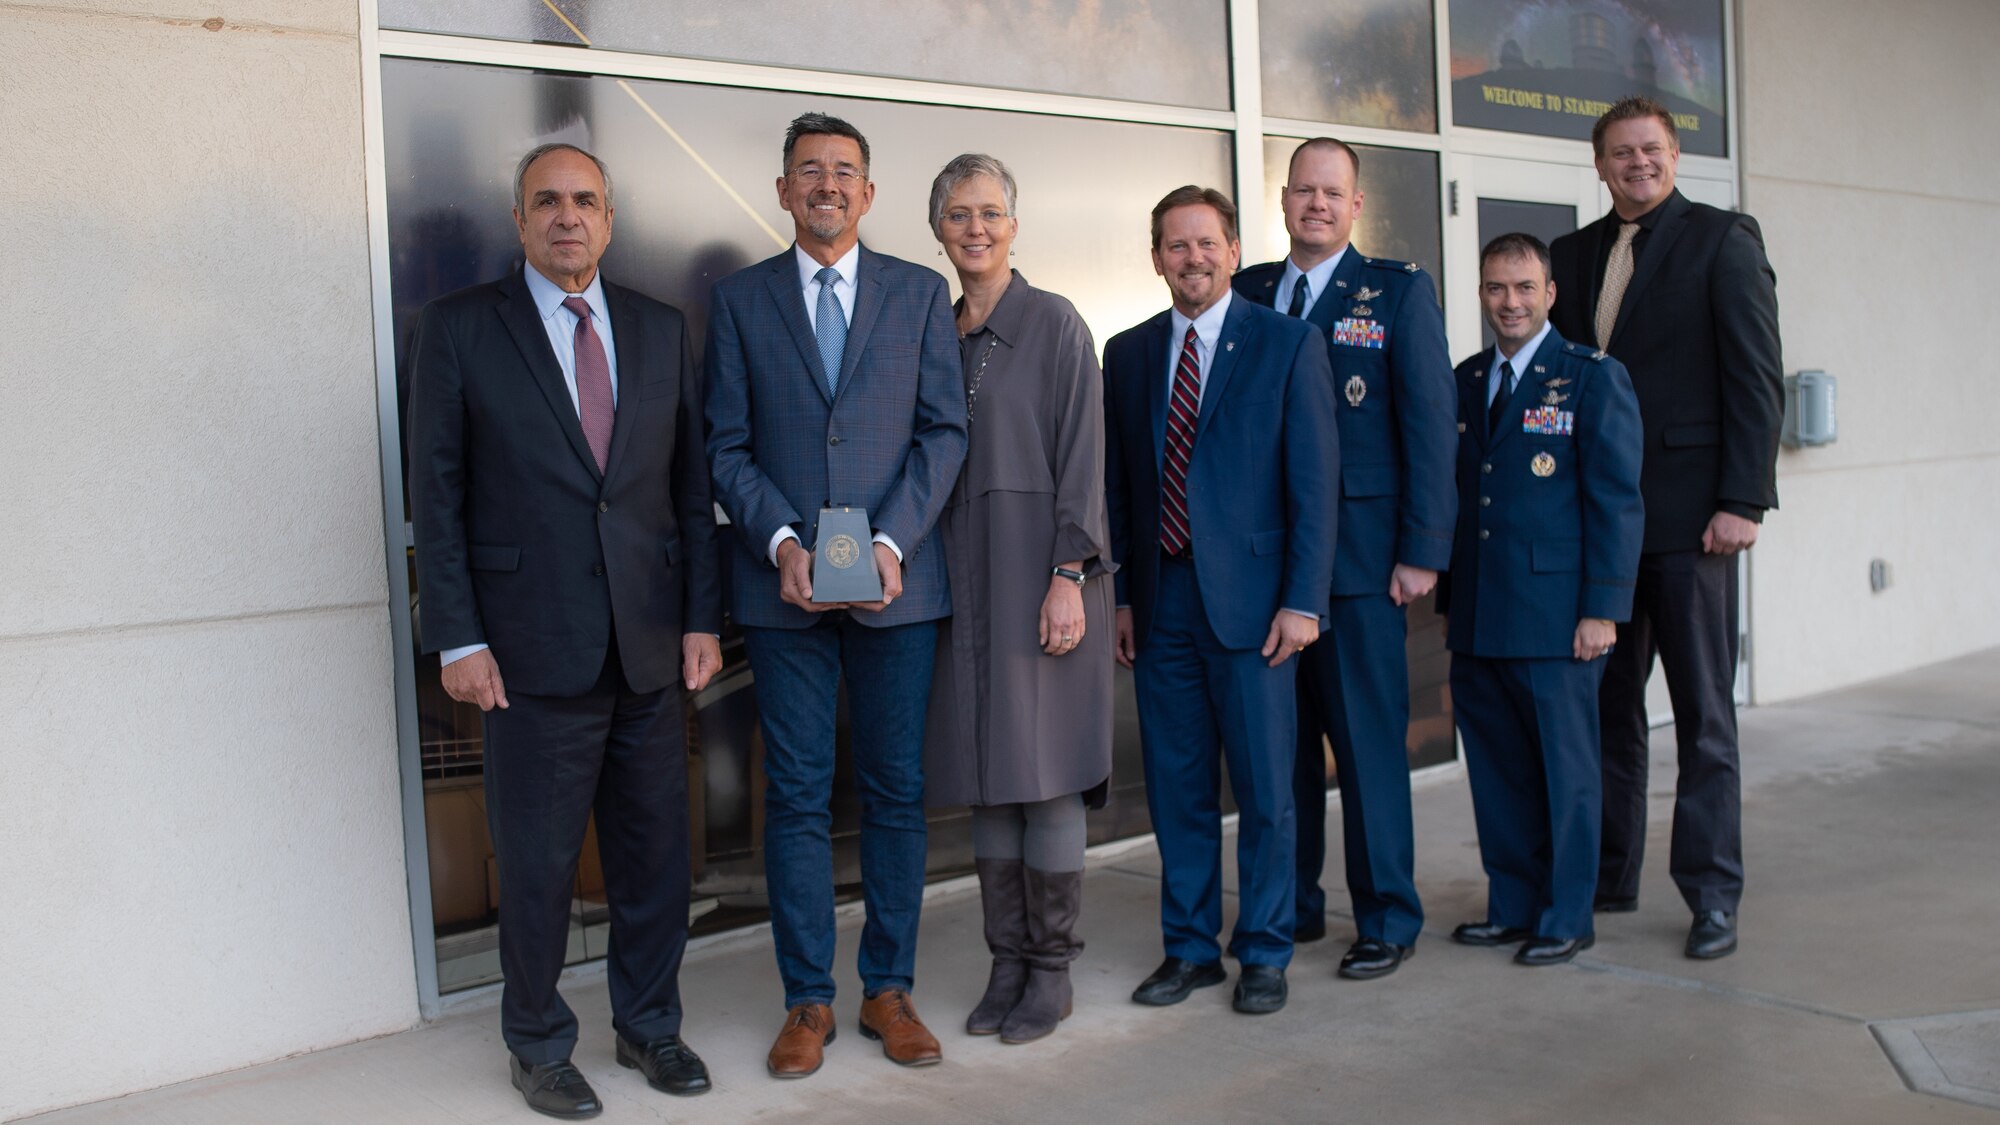 Left to Right: Dr. Richard Joseph Chief Scientist of the Air Force; Dr. Robert Johnson 2018 Harold Brown Award winner; Dr. Bethany Kolb wife of Dr. Johnson; Dr. Kelly Hammett AFRL Directed Energy director; Col. Joseph Roth AFRL Space Electro-Optics division chief; Col. Mario Serna Military Assistant to the Air Force Chief Scientist; and Dr. Darrell Lochtefeld Special Assistant to the Air Force Chief Scientist following the awards ceremony on Nov. 21, 2019. (U.S. Air Force photo/ Macee Hunt)